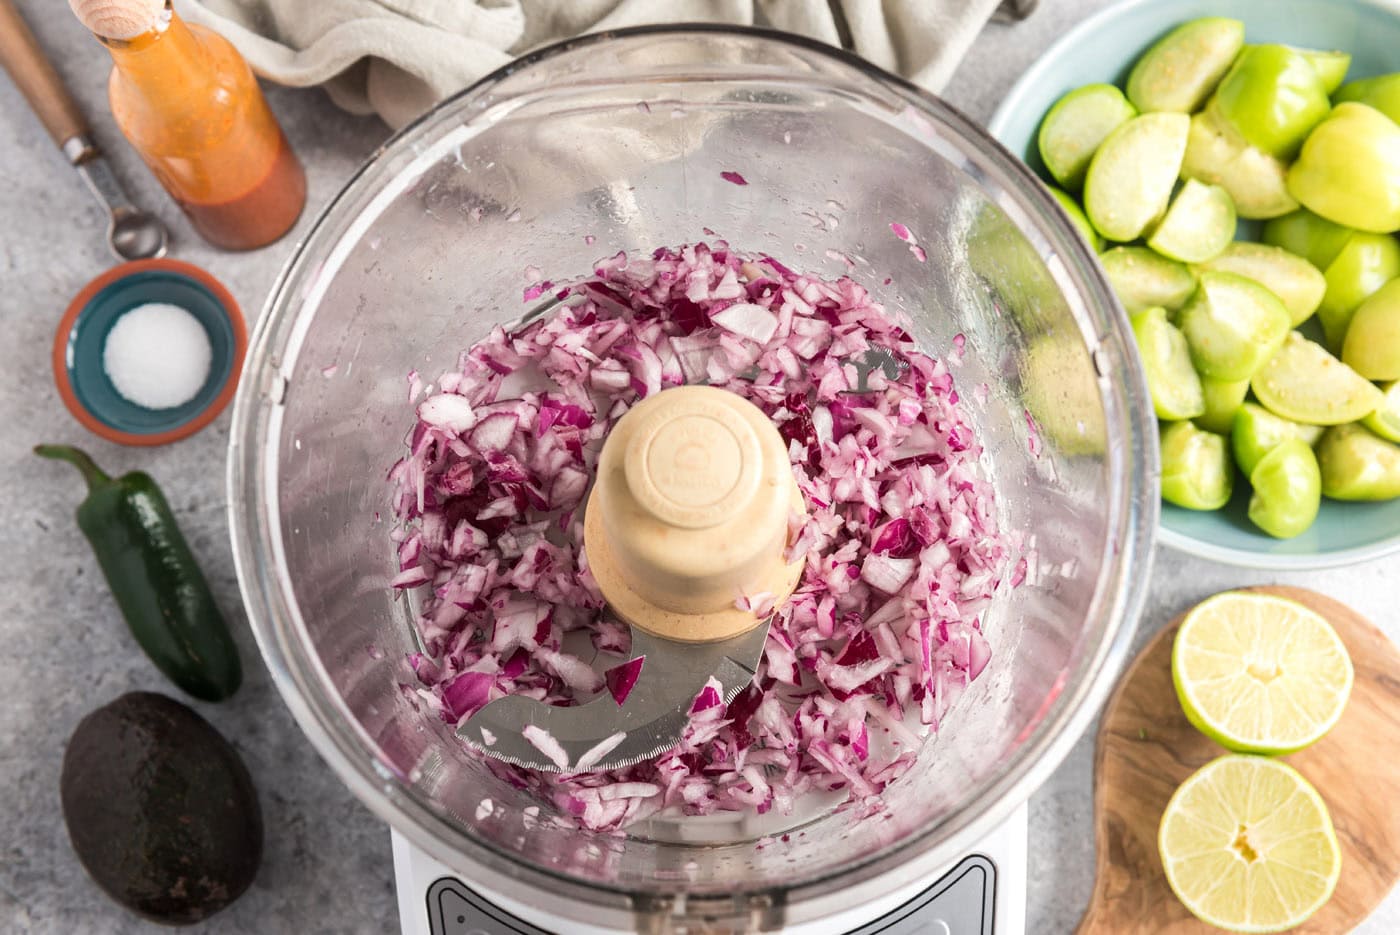 diced red onion in a food processor